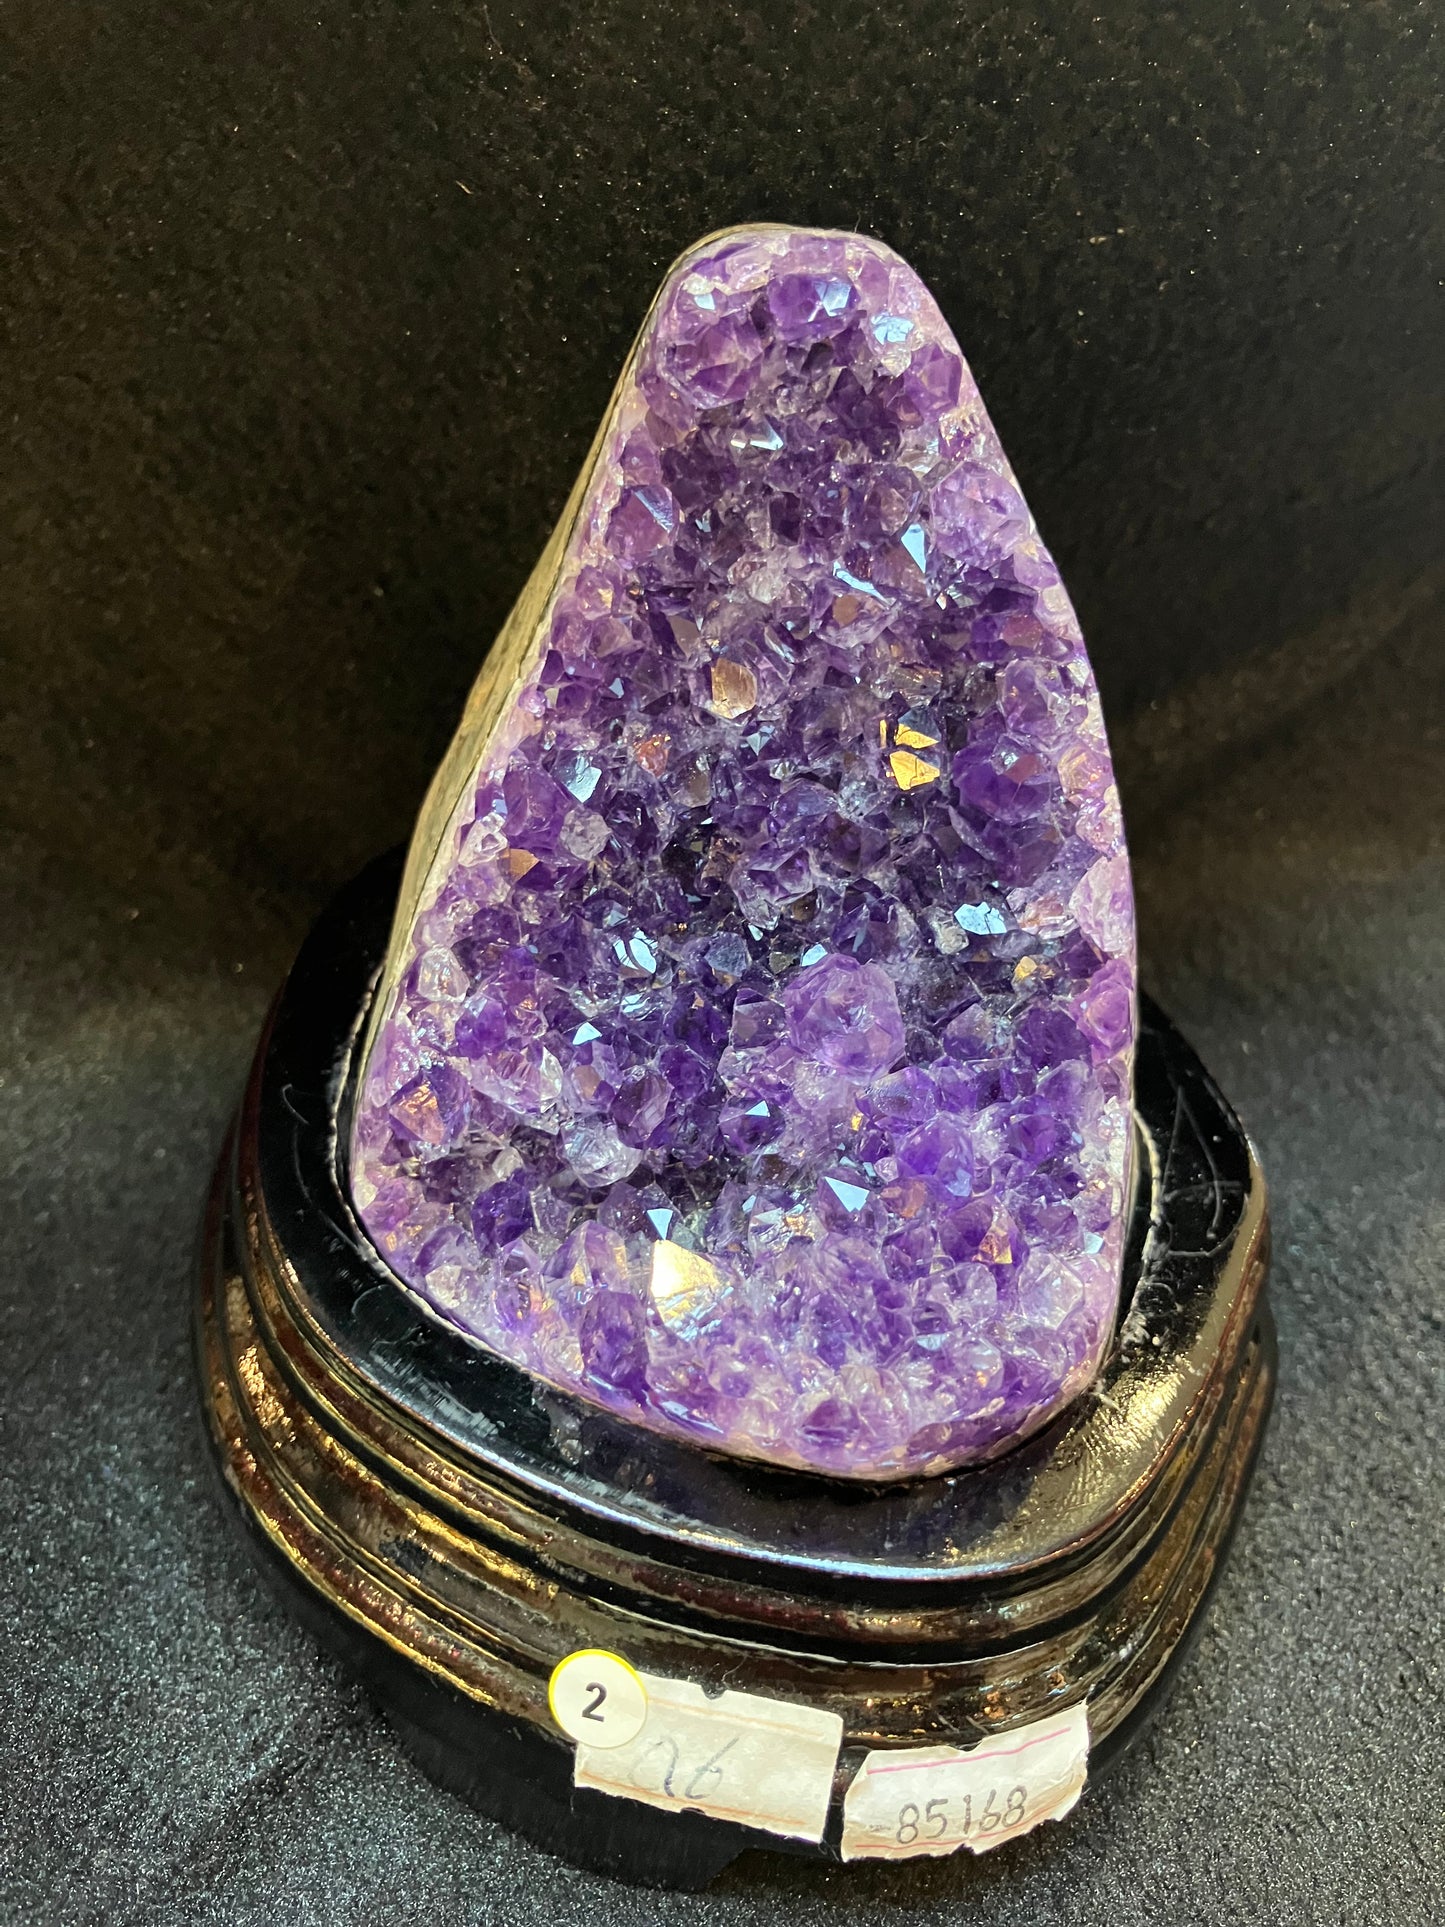 609g Natural Amethyst Uruguay Piece Fengshui Display with Wooden Base